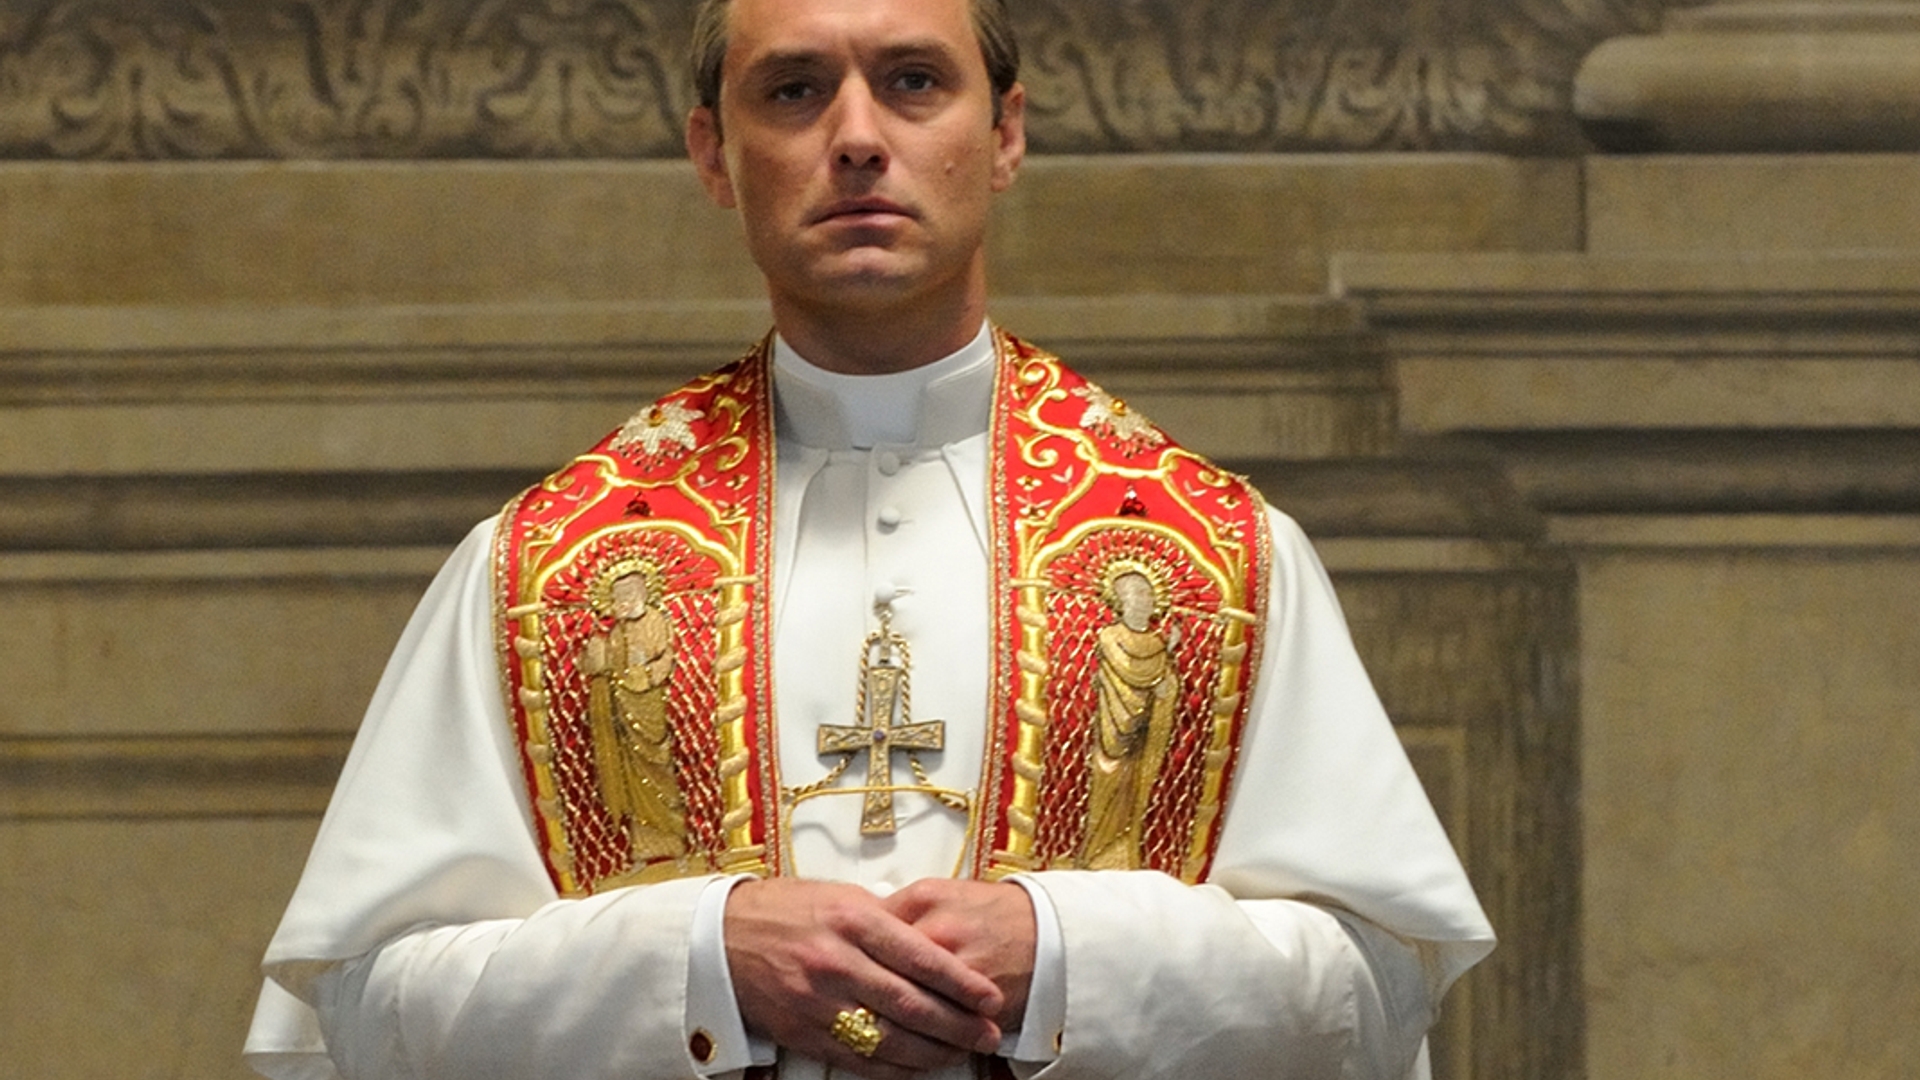 The-Young-Pope-2